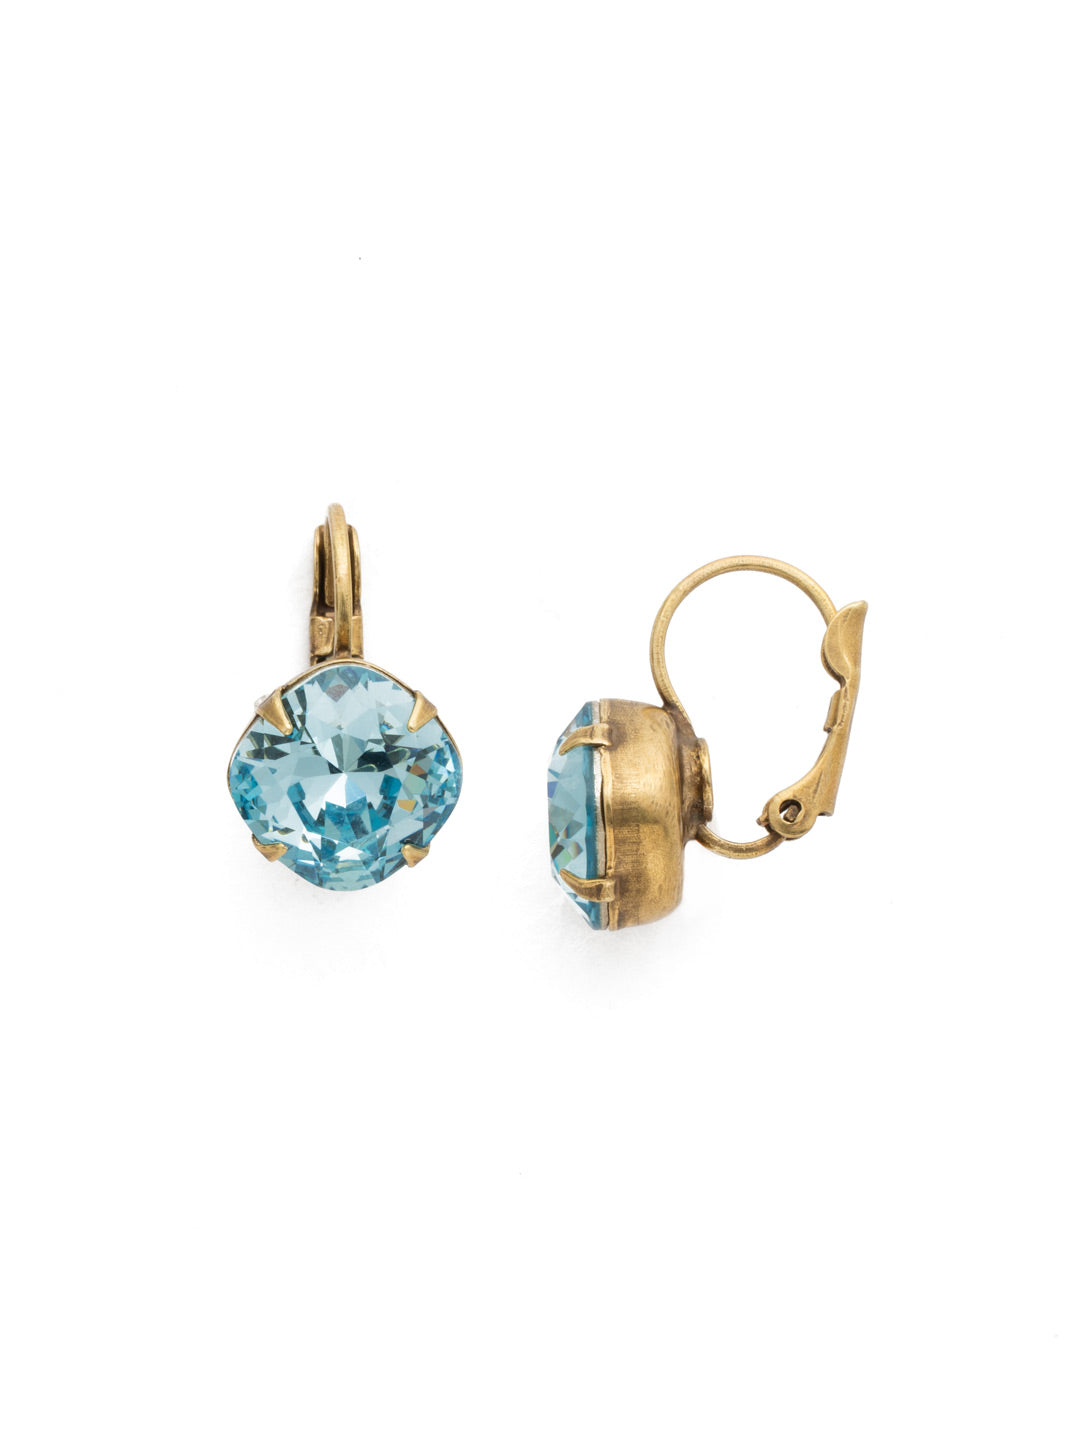 Cushion-Cut Dangle Earrings - EDL12AGAQU - <p>A simple, yet stunning earring featuring a cushion cut crystal that will never go out of style. From Sorrelli's Aquamarine collection in our Antique Gold-tone finish.</p>